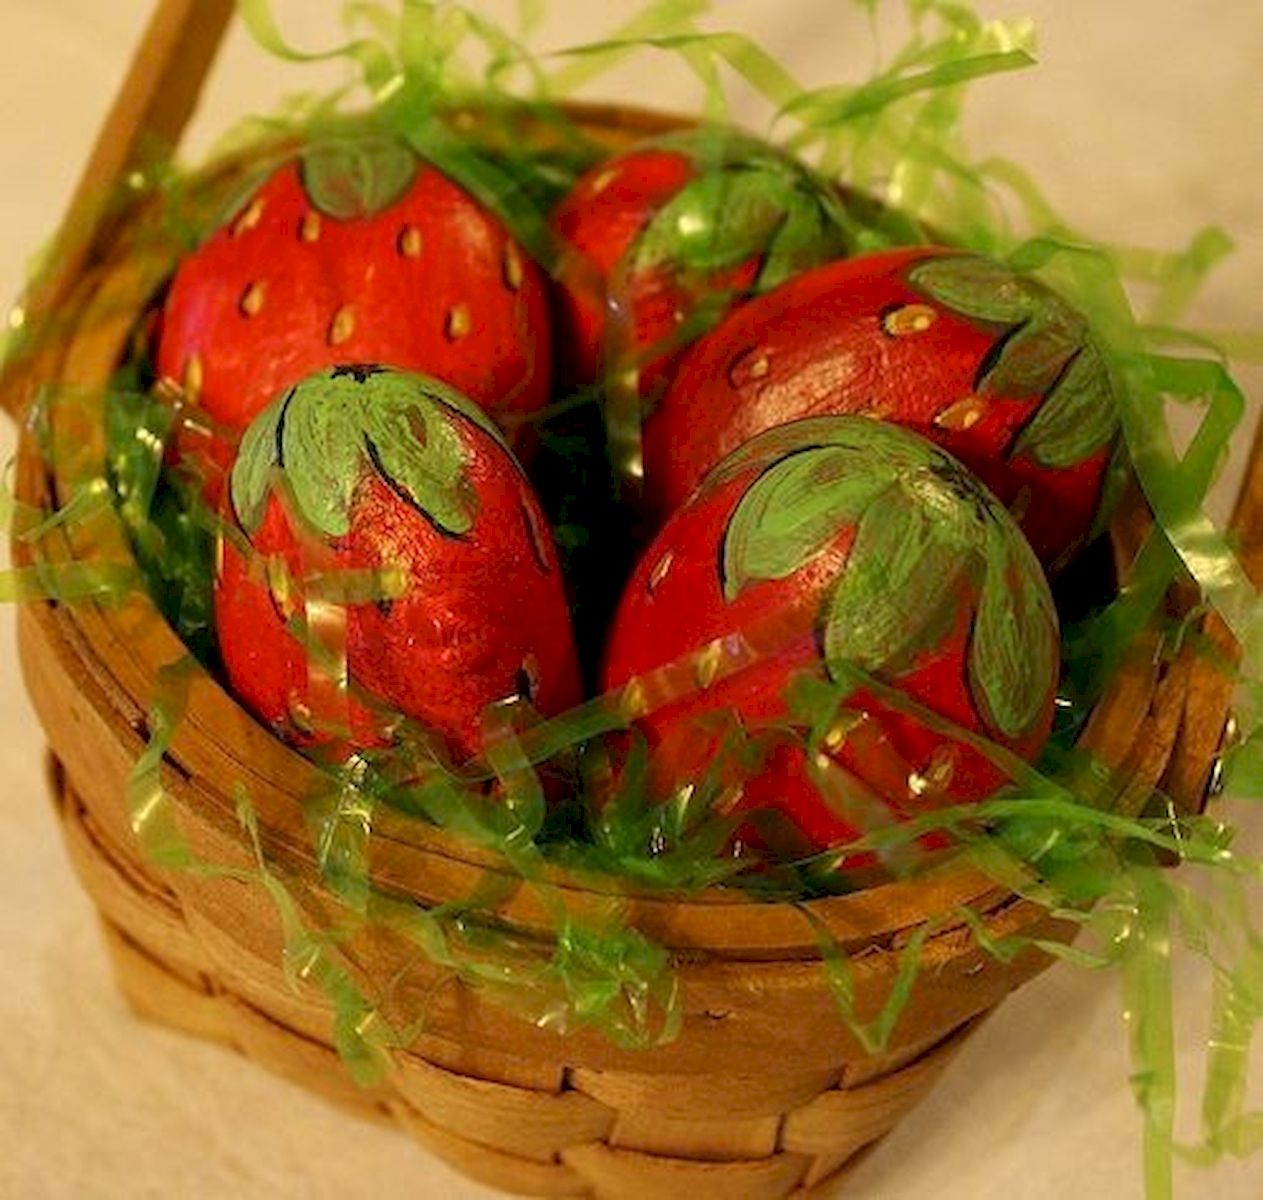 40 Awesome DIY Painted Rocks Fruits Ideas (24)